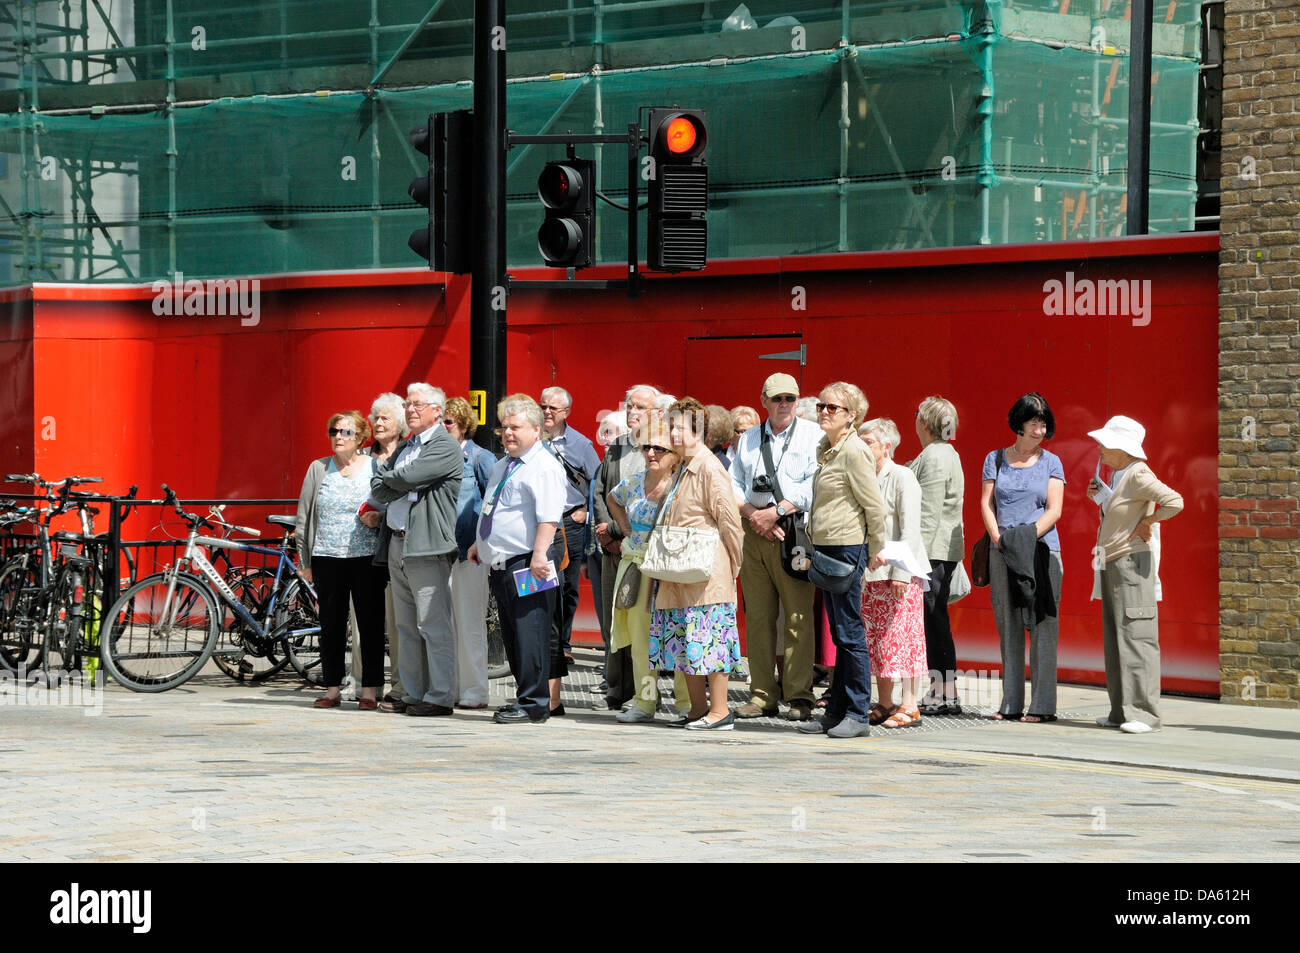 Group of people, tourists waiting to cross the road, Kings Cross, London England Britain  UK Stock Photo